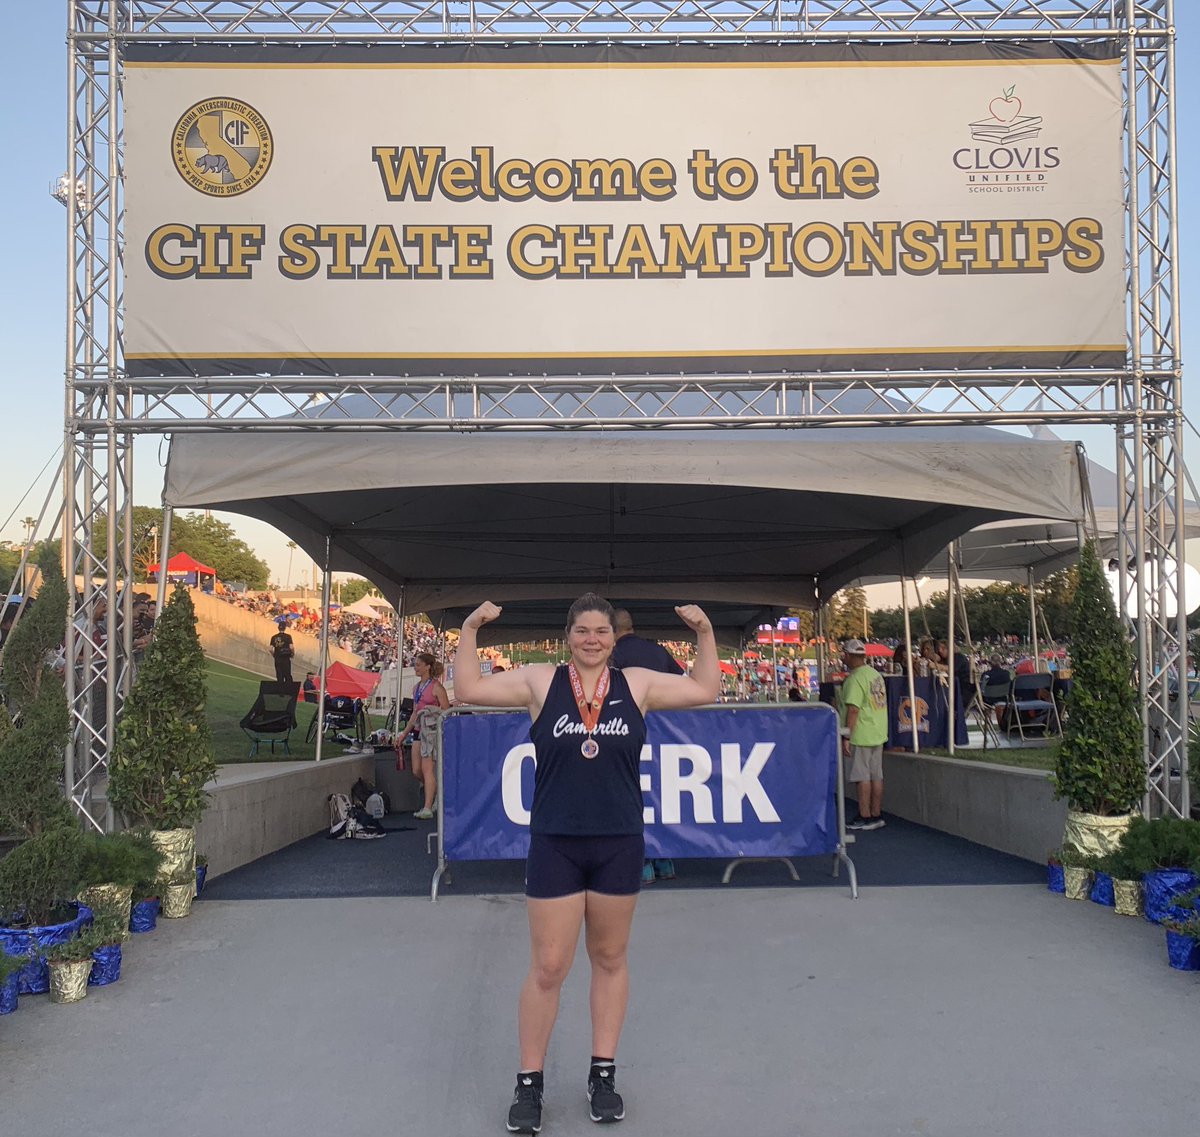 Trinity Tipton Camarillo’s Super Sophomore ended her Outstanding year metaling at CIF State Championships in the Discus. Trinity also made it to the State Championships in Wrestling. @vcspreps @CamHighAthletic @EliavAppelbaum @ScorpAthleticBC @CamarilloAcorn